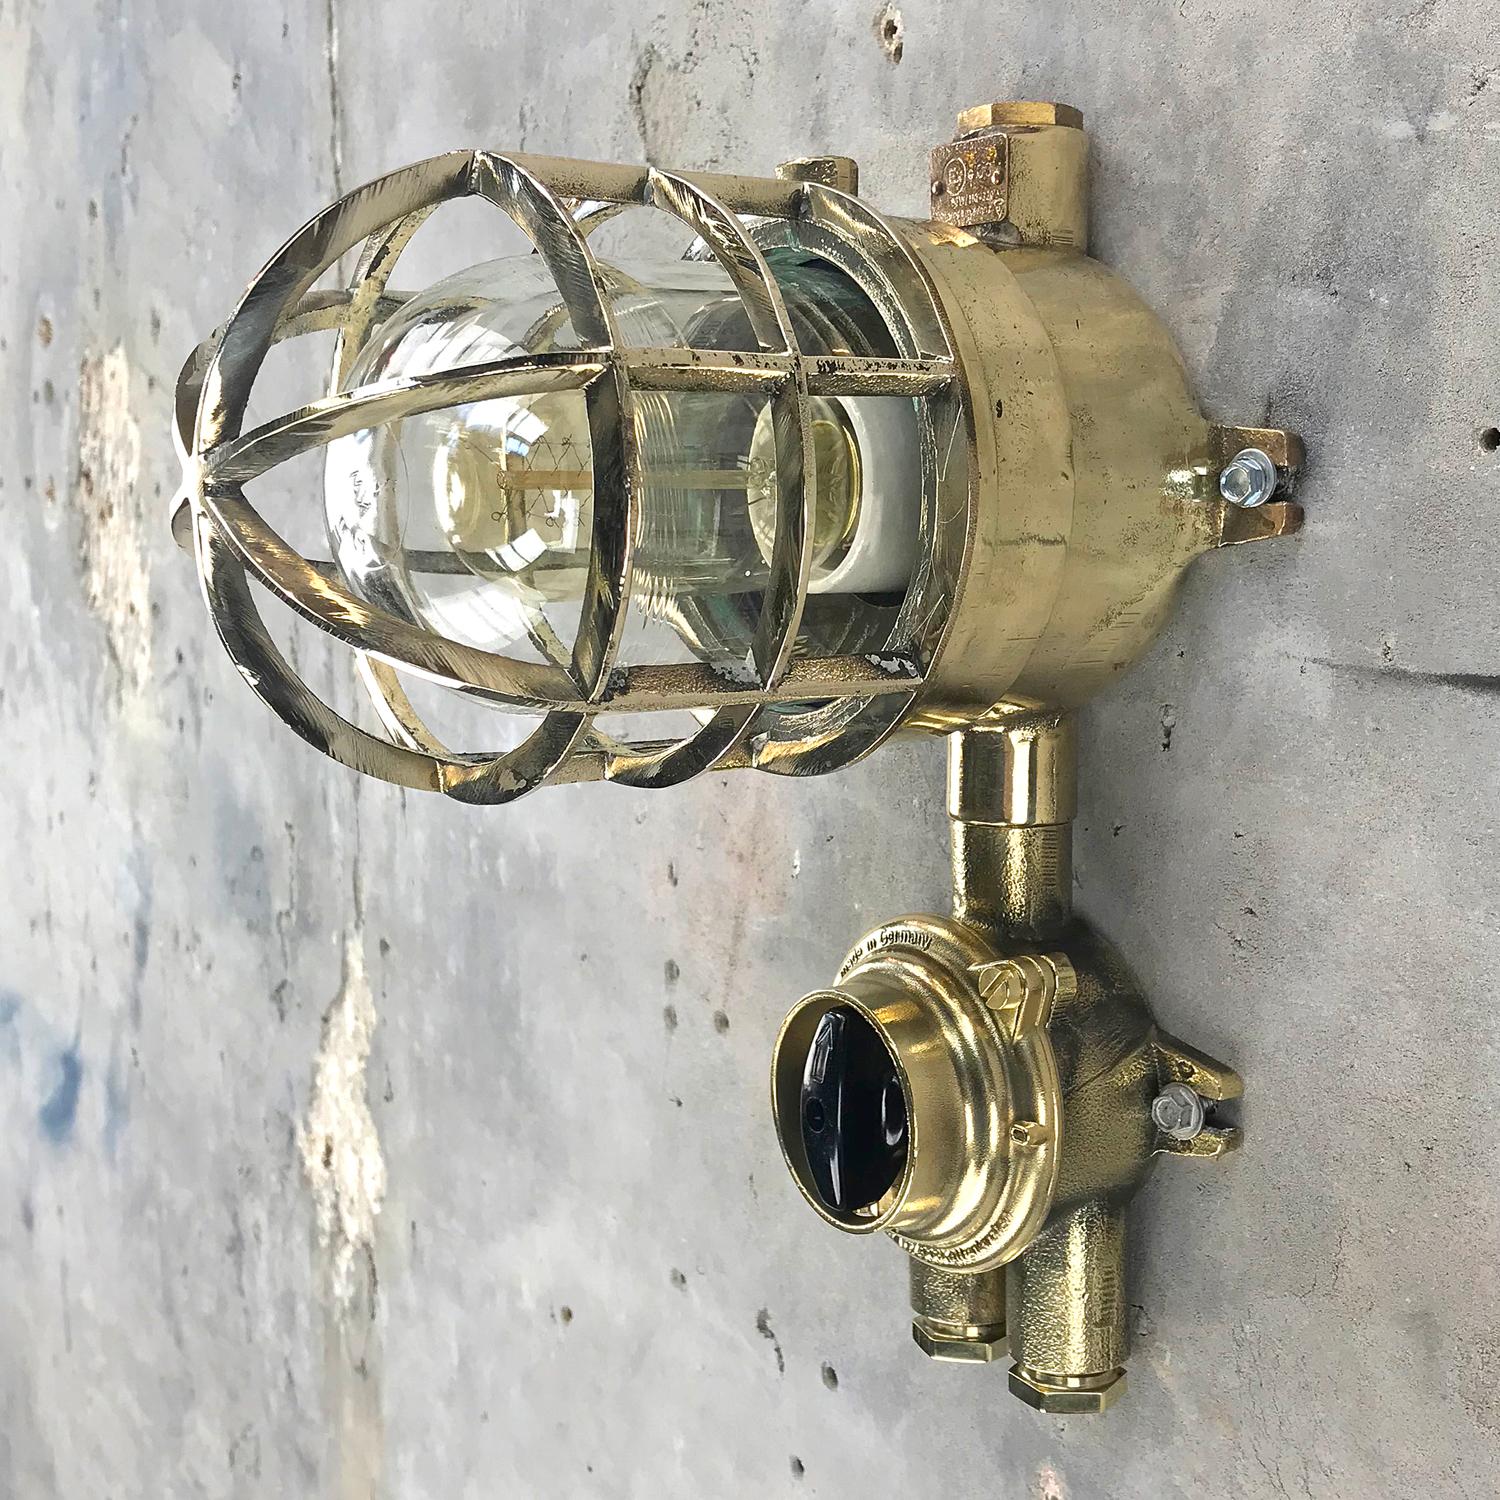 1970s German Explosion Proof Wall Light Cast Brass, Glass Shade & Rotary Switch For Sale 4